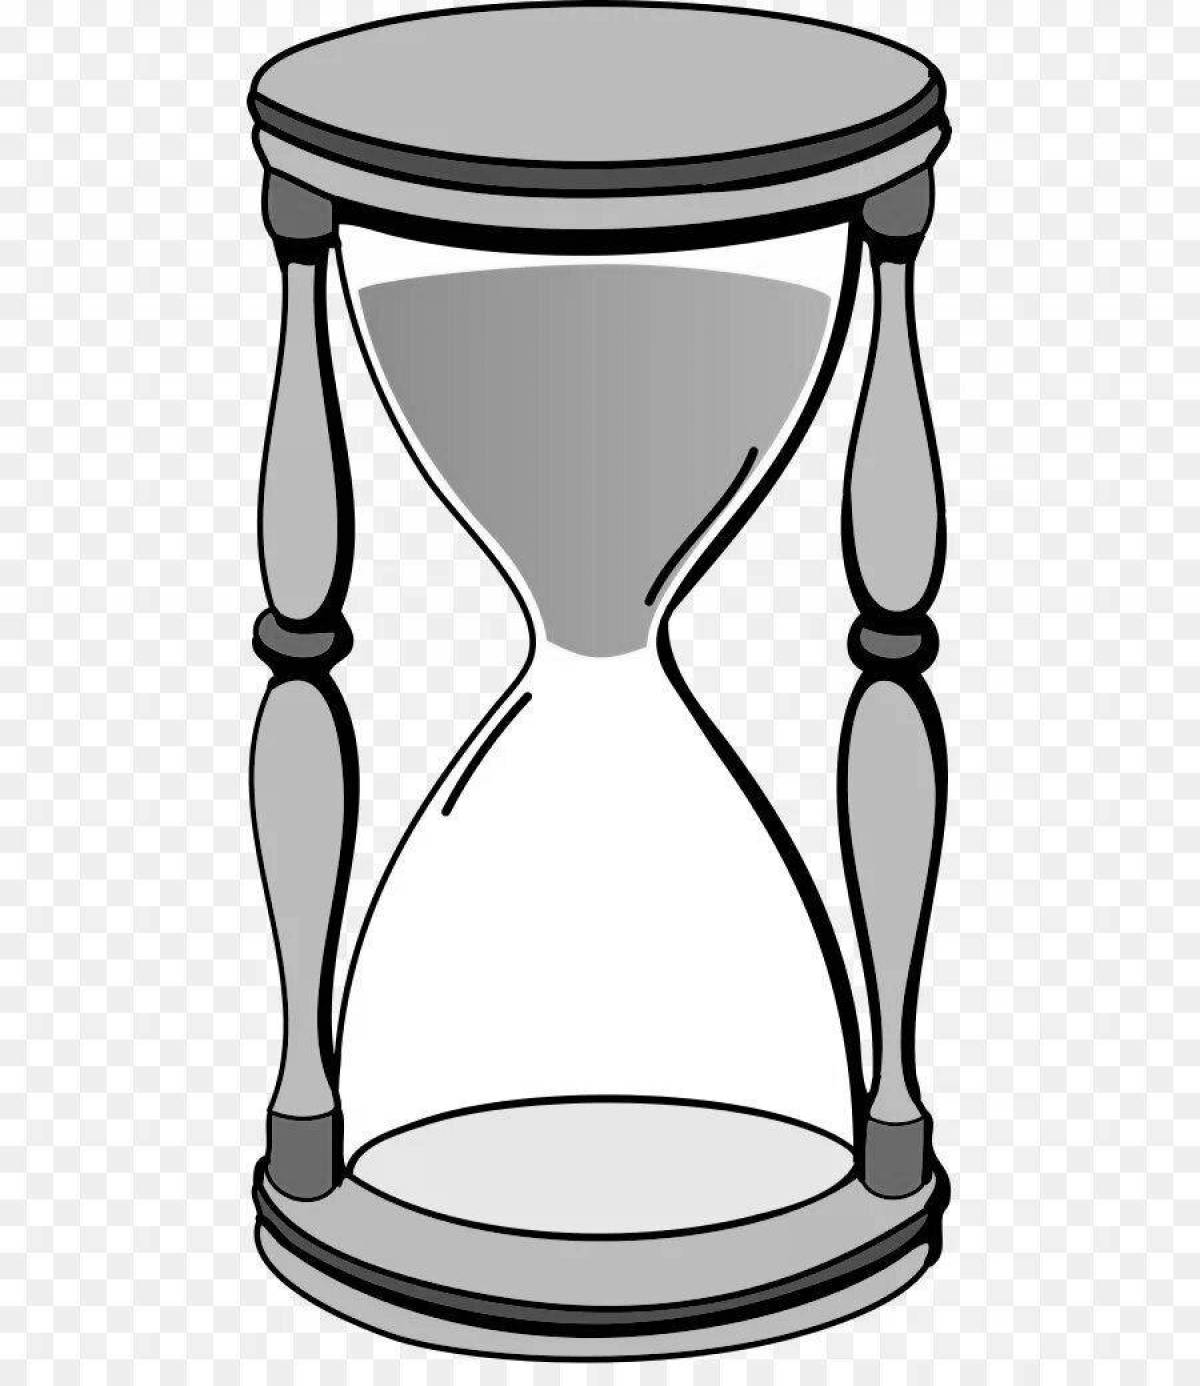 Gorgeous hourglass coloring page